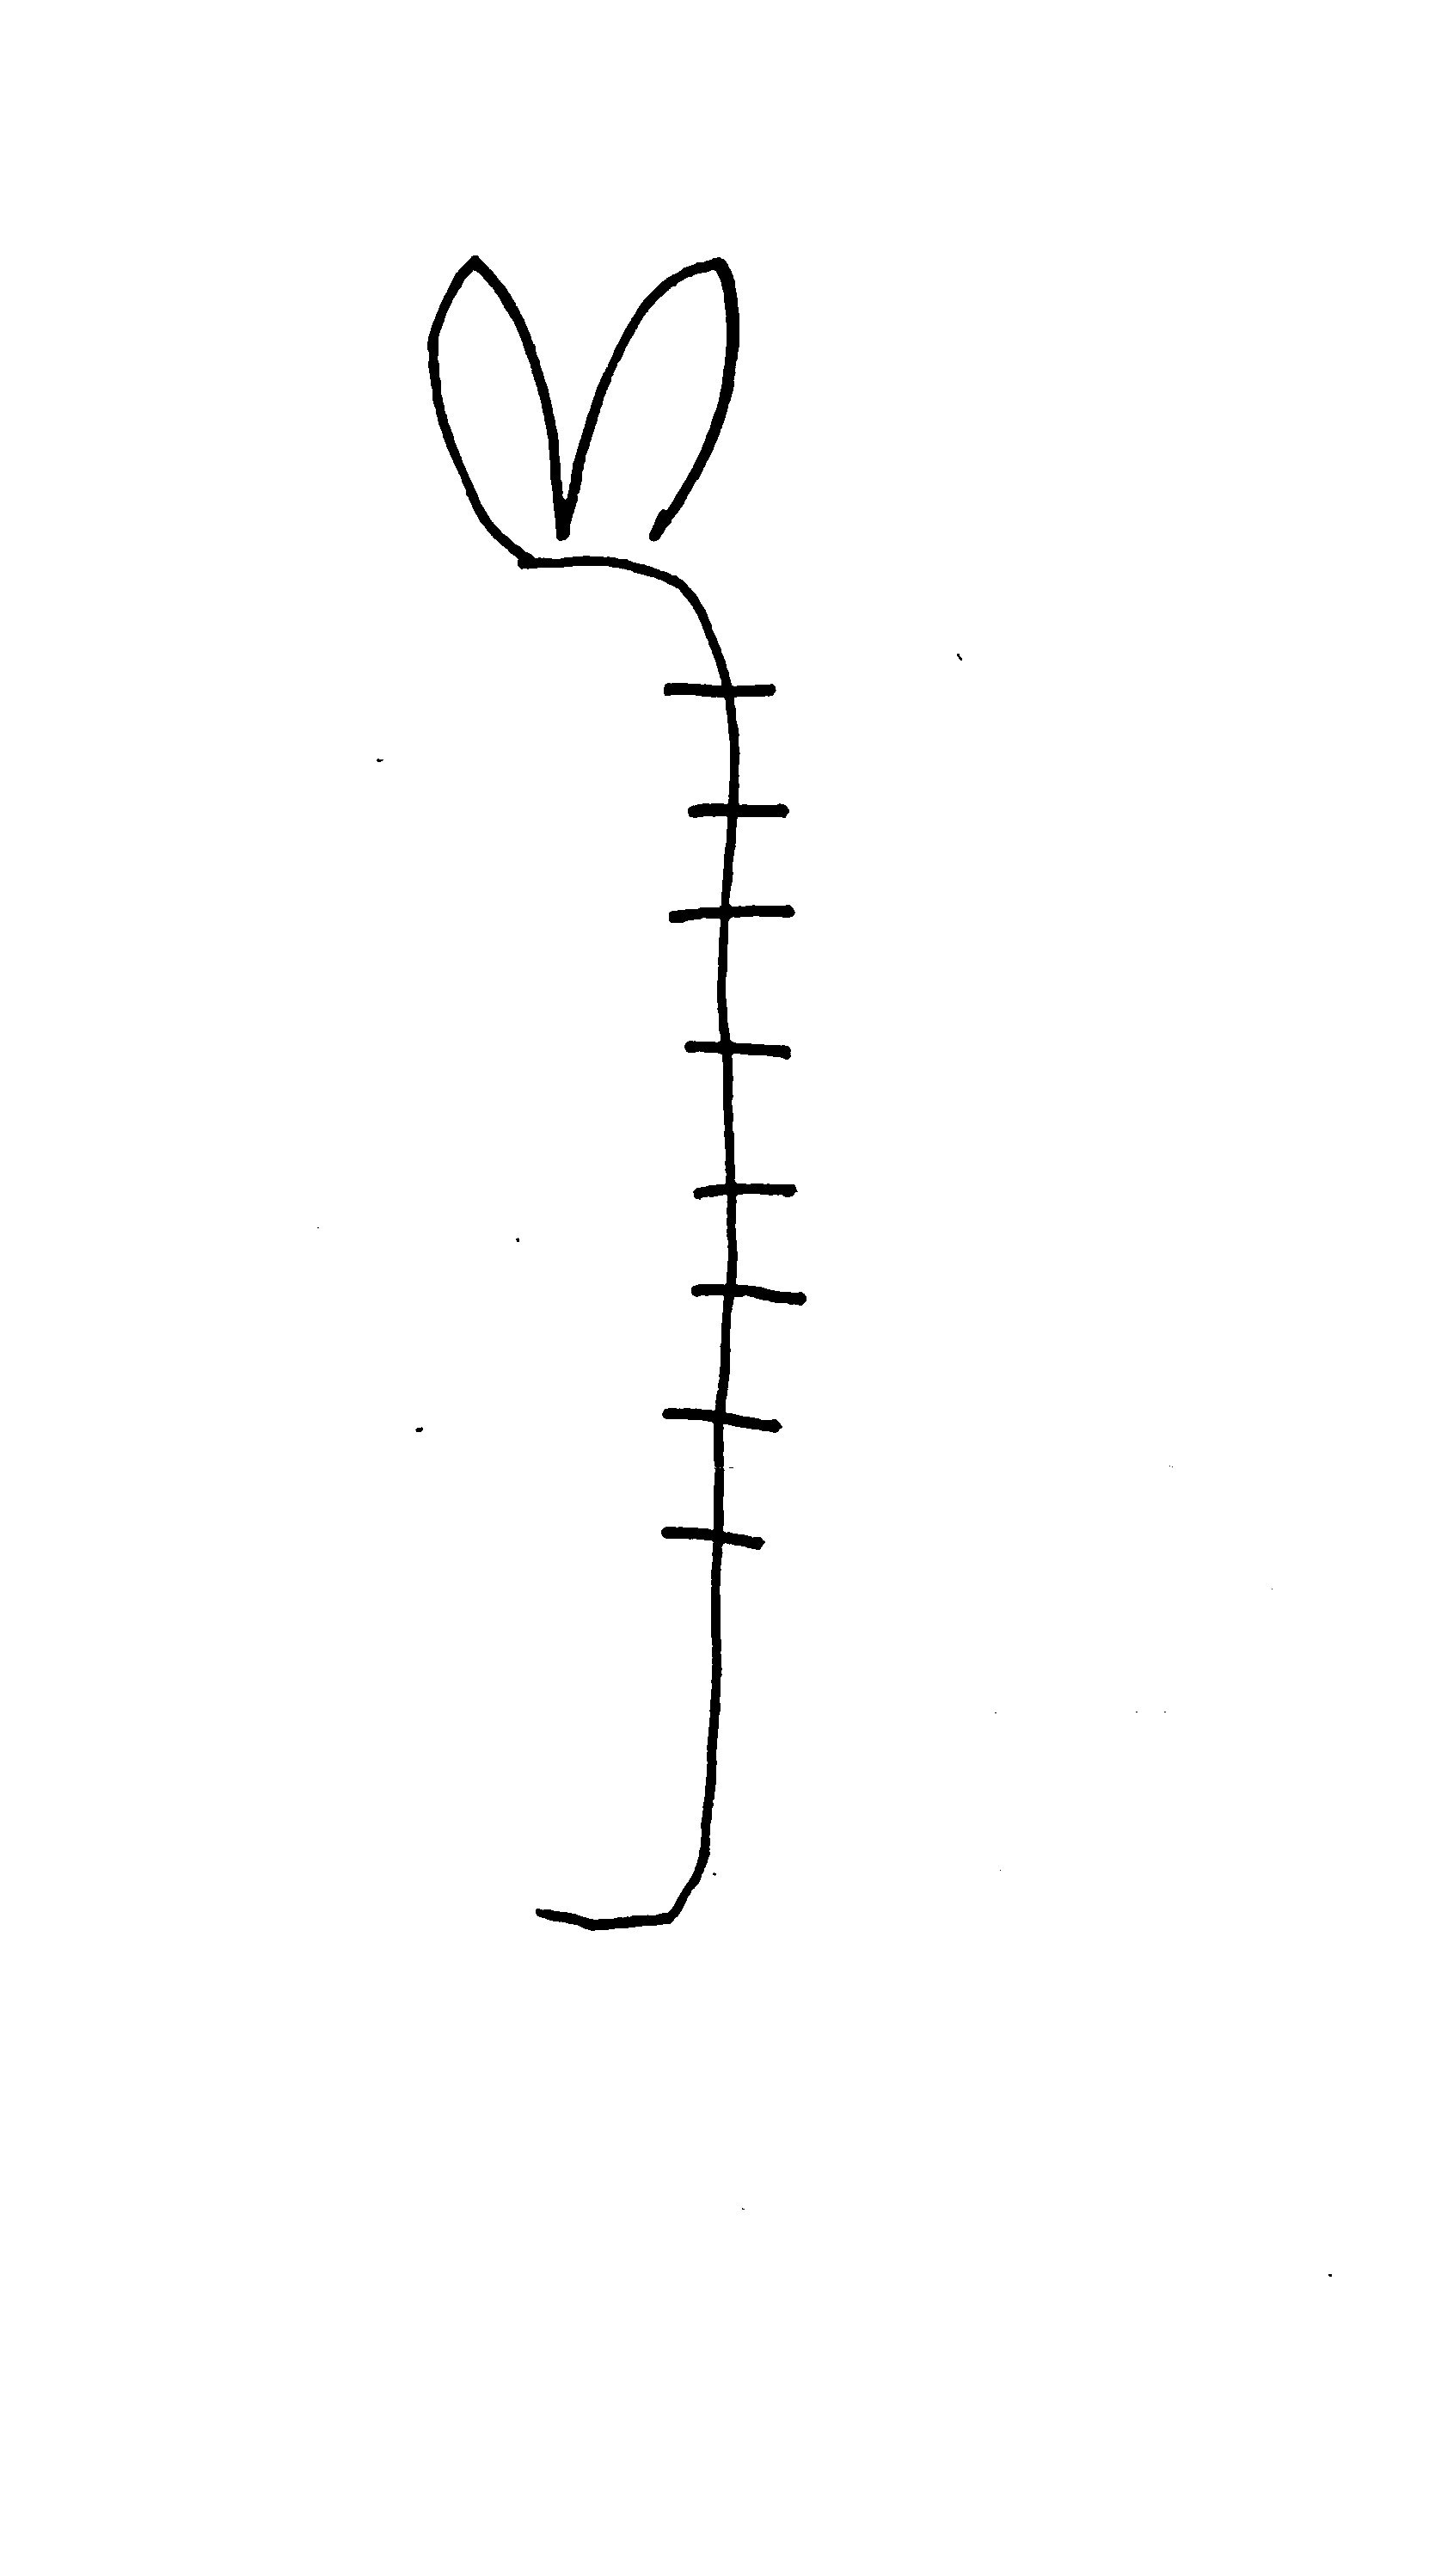 pen drawing of a ladder with bunny ears